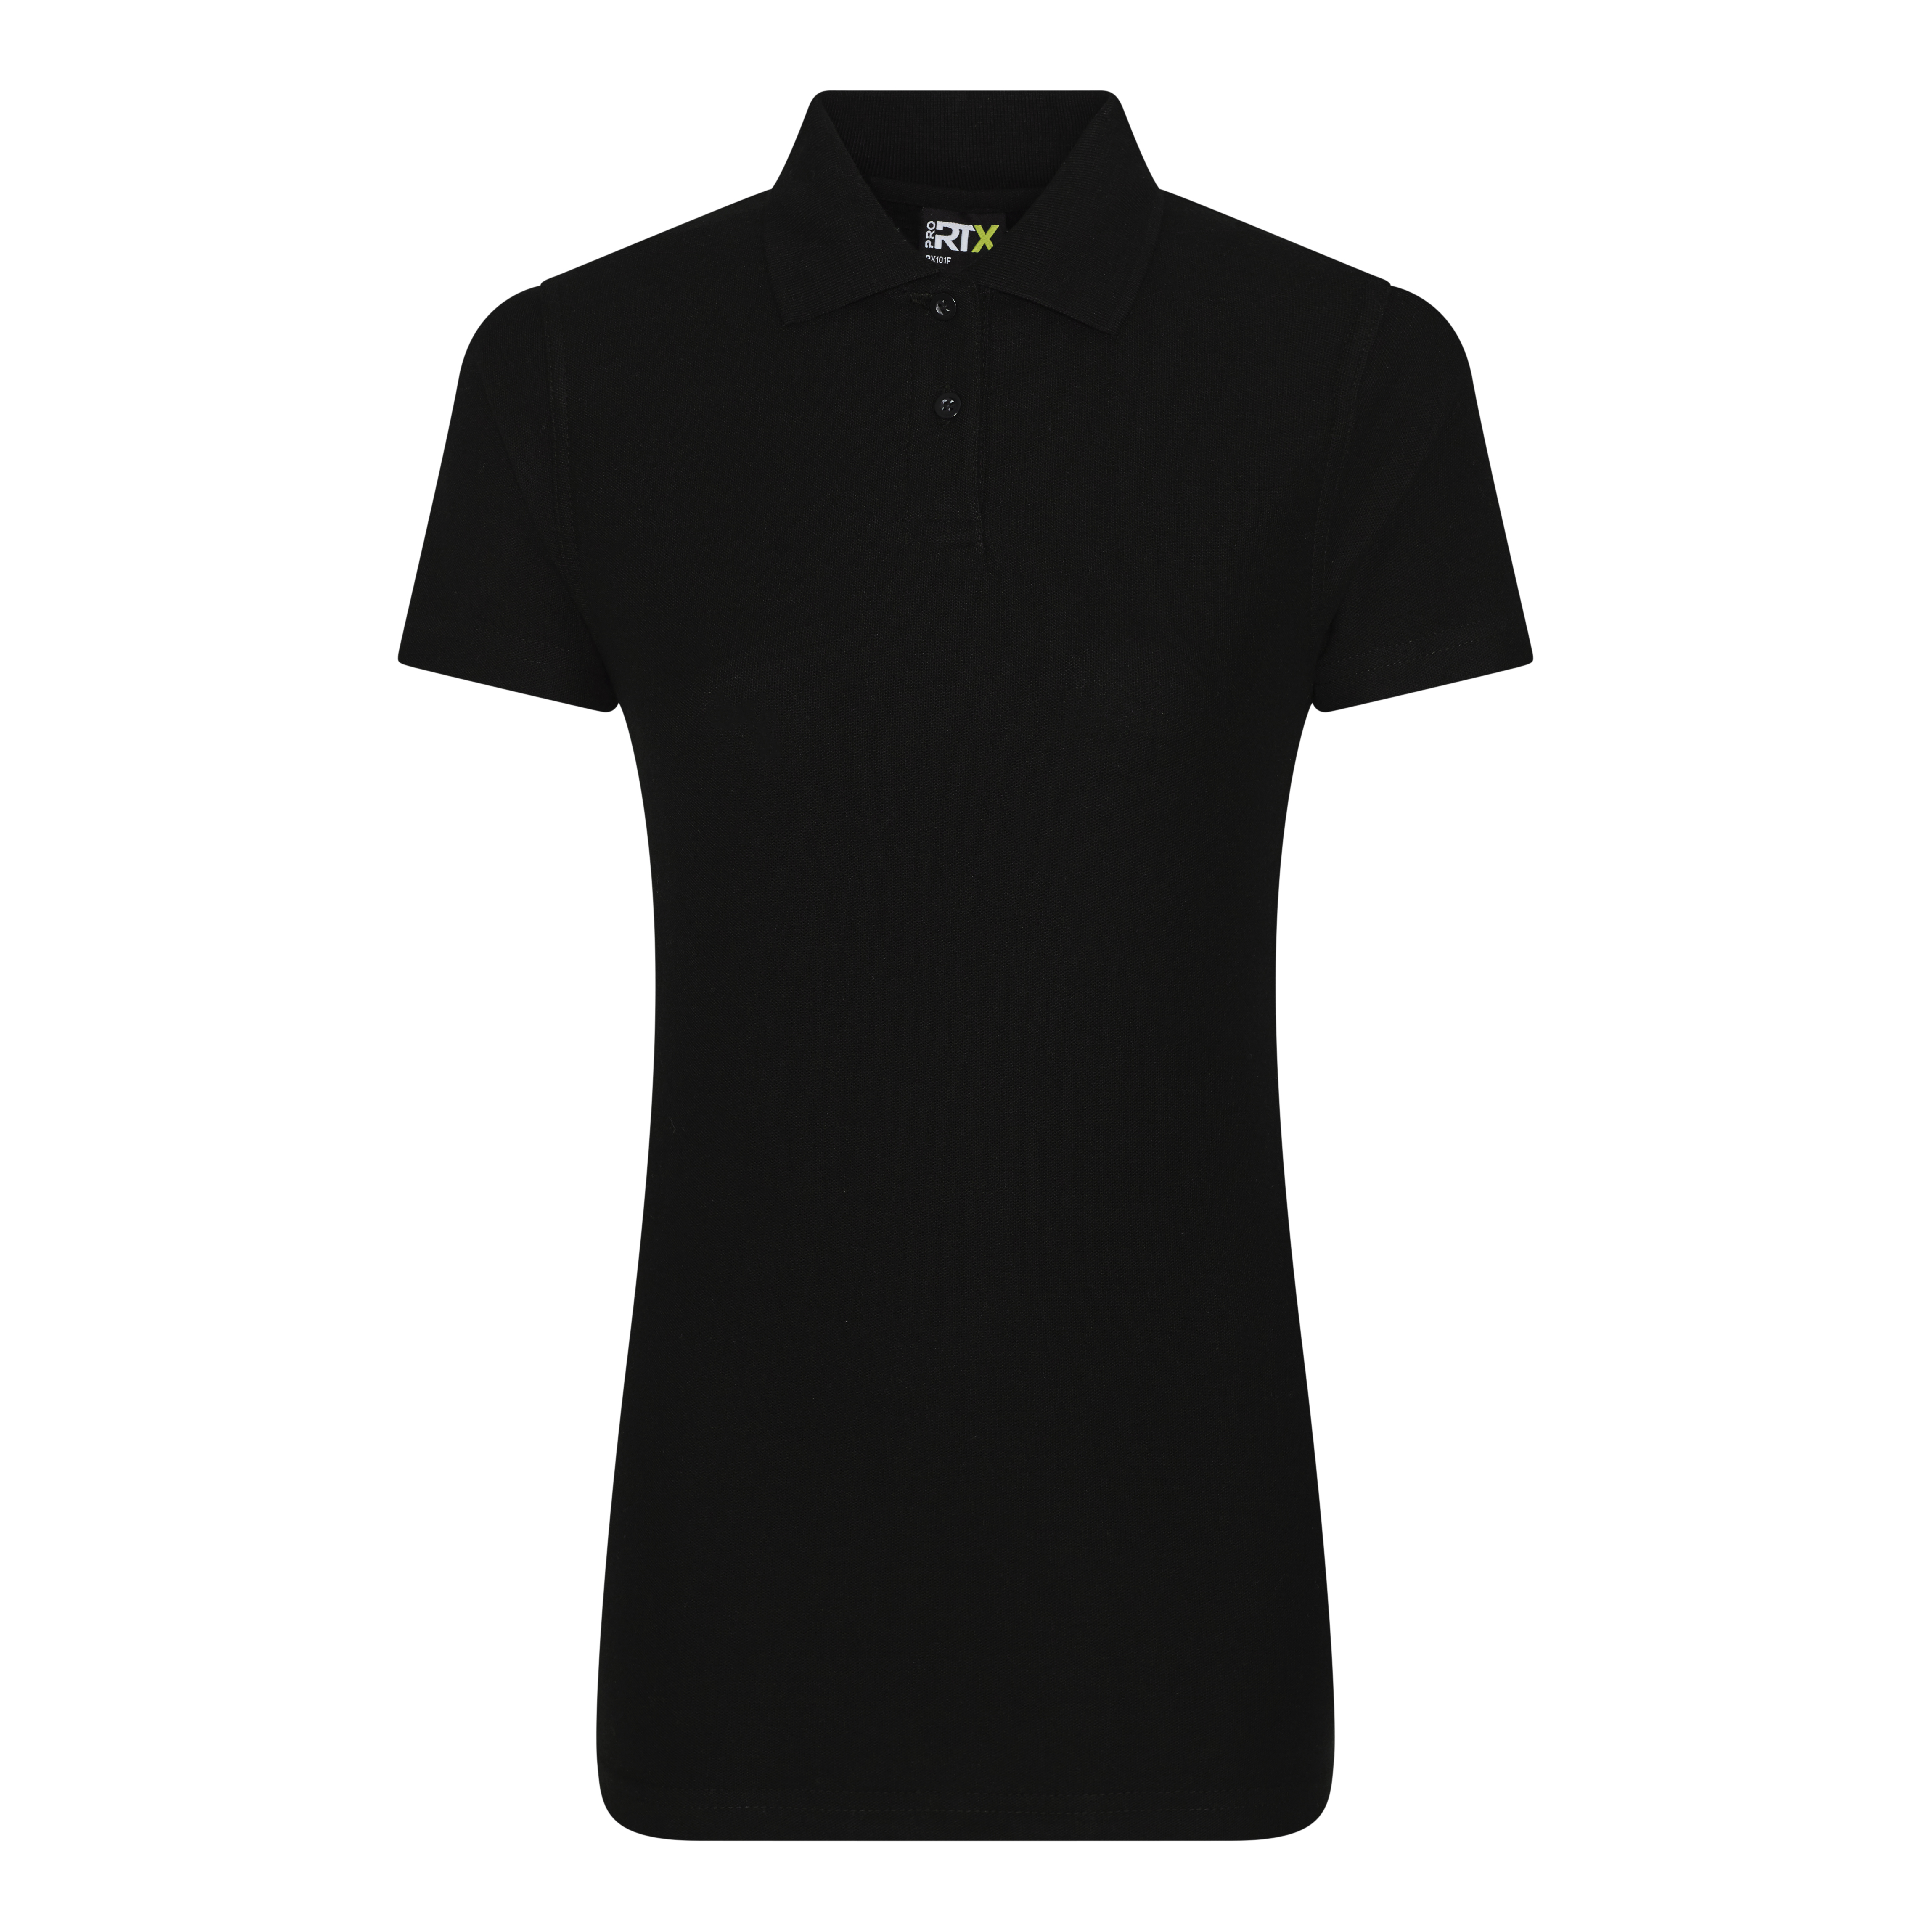 ax-httpswebsystems.s3.amazonaws.comtmp_for_downloadpro-rtx-ladies-pro-polo-black.jpg